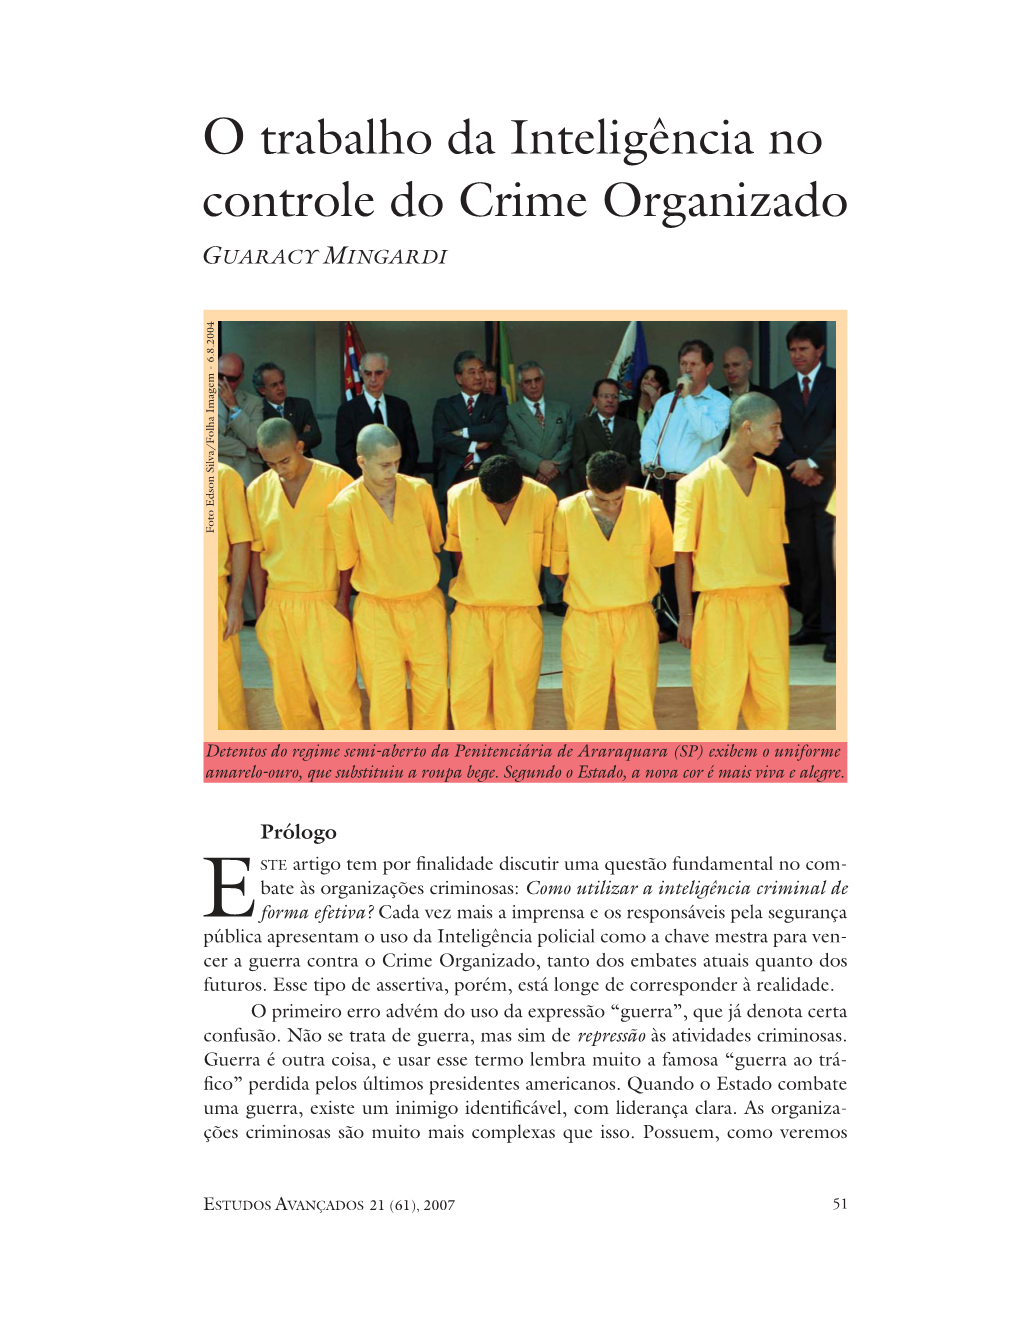 The Role of Intelligence Work in the Control of Organized Crime